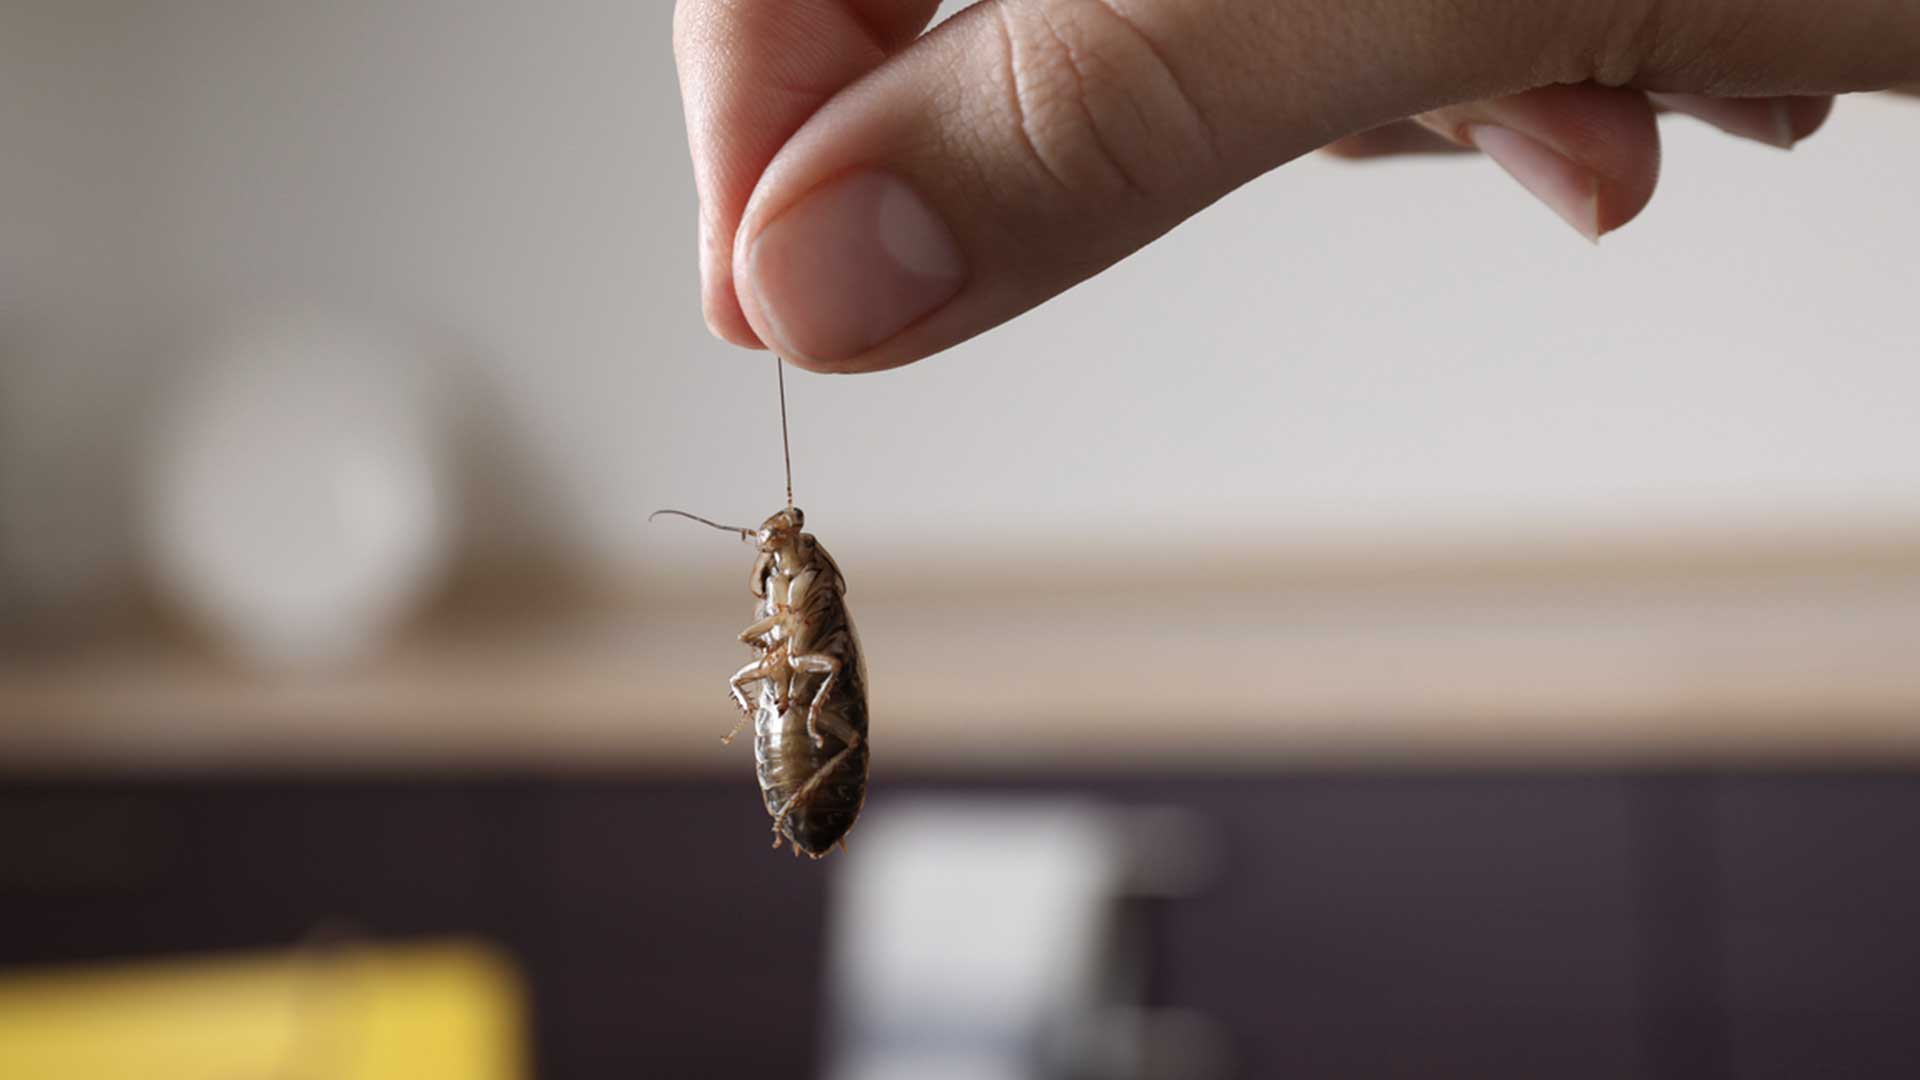 person holding up dead roach